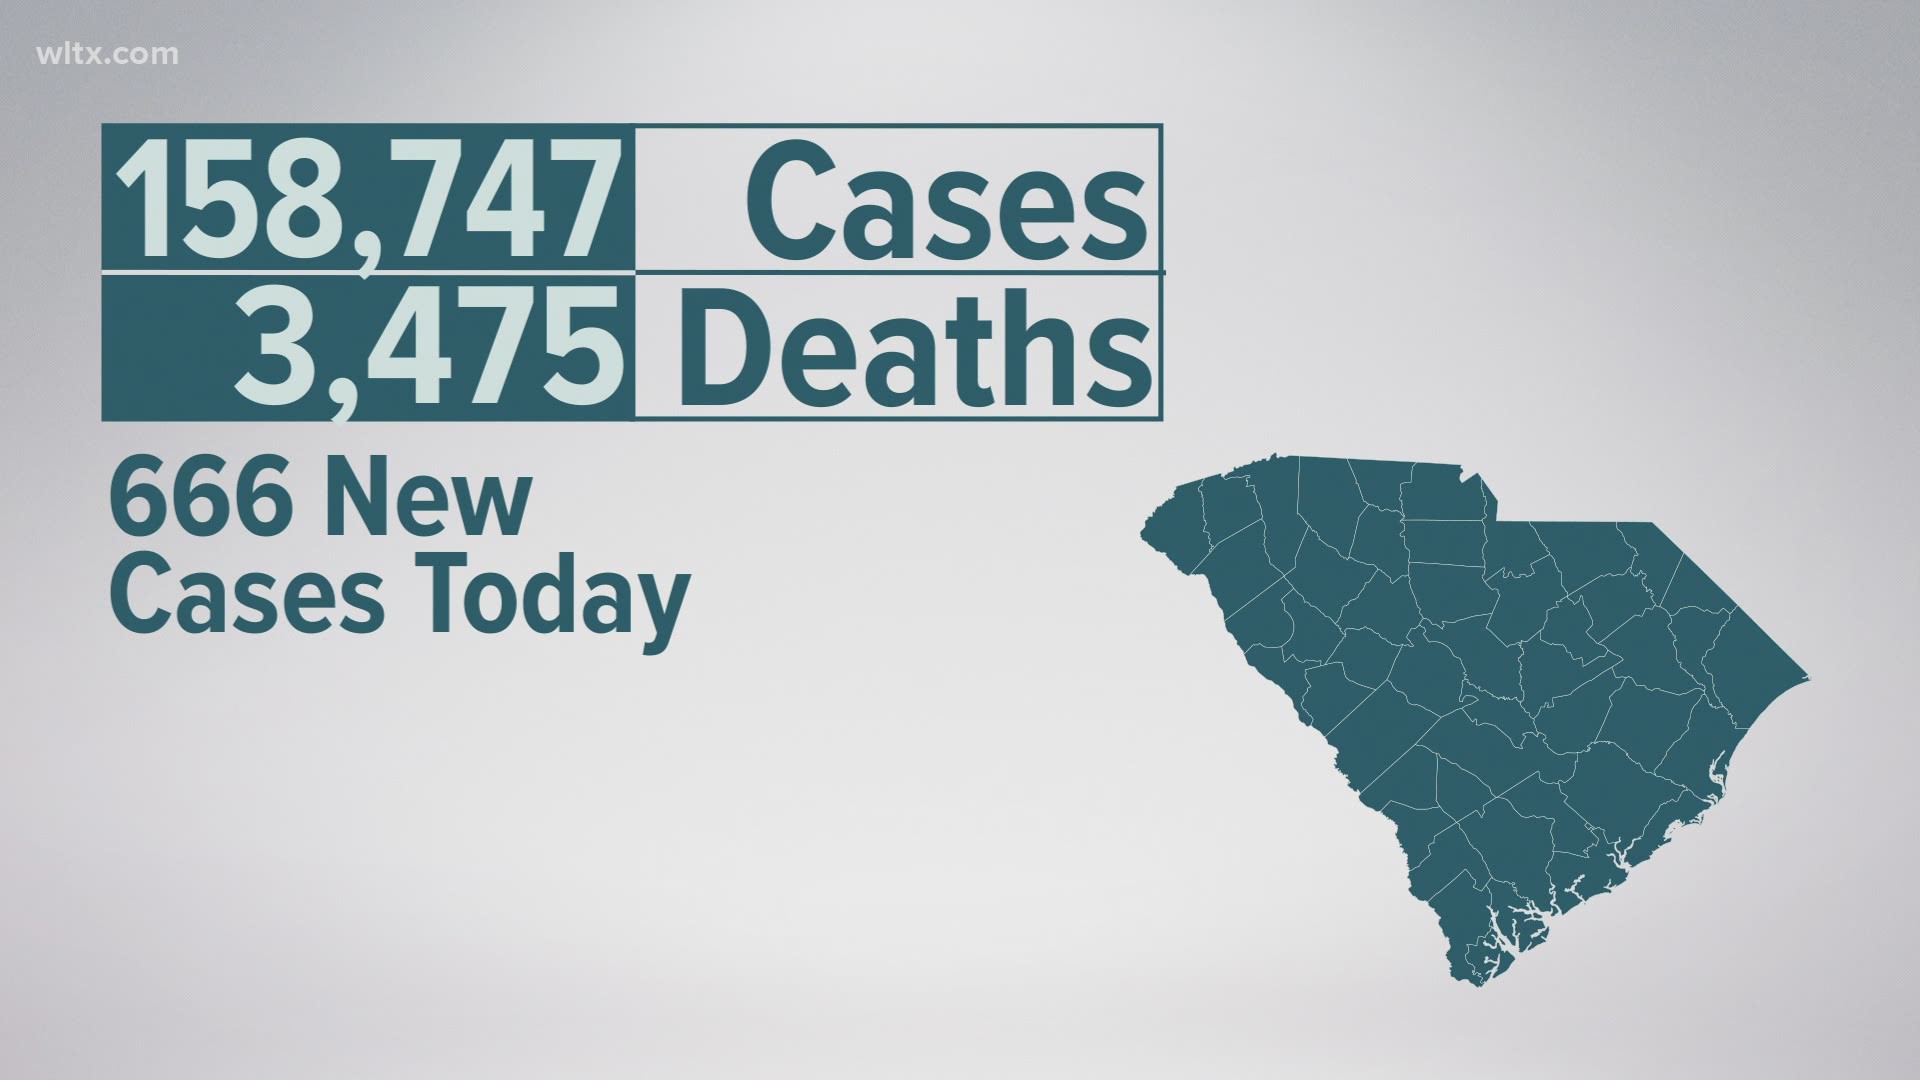 This brings the total number of confirmed cases to 158,747, probable cases to 6,746, confirmed deaths to 3,475, and 221 probable deaths.